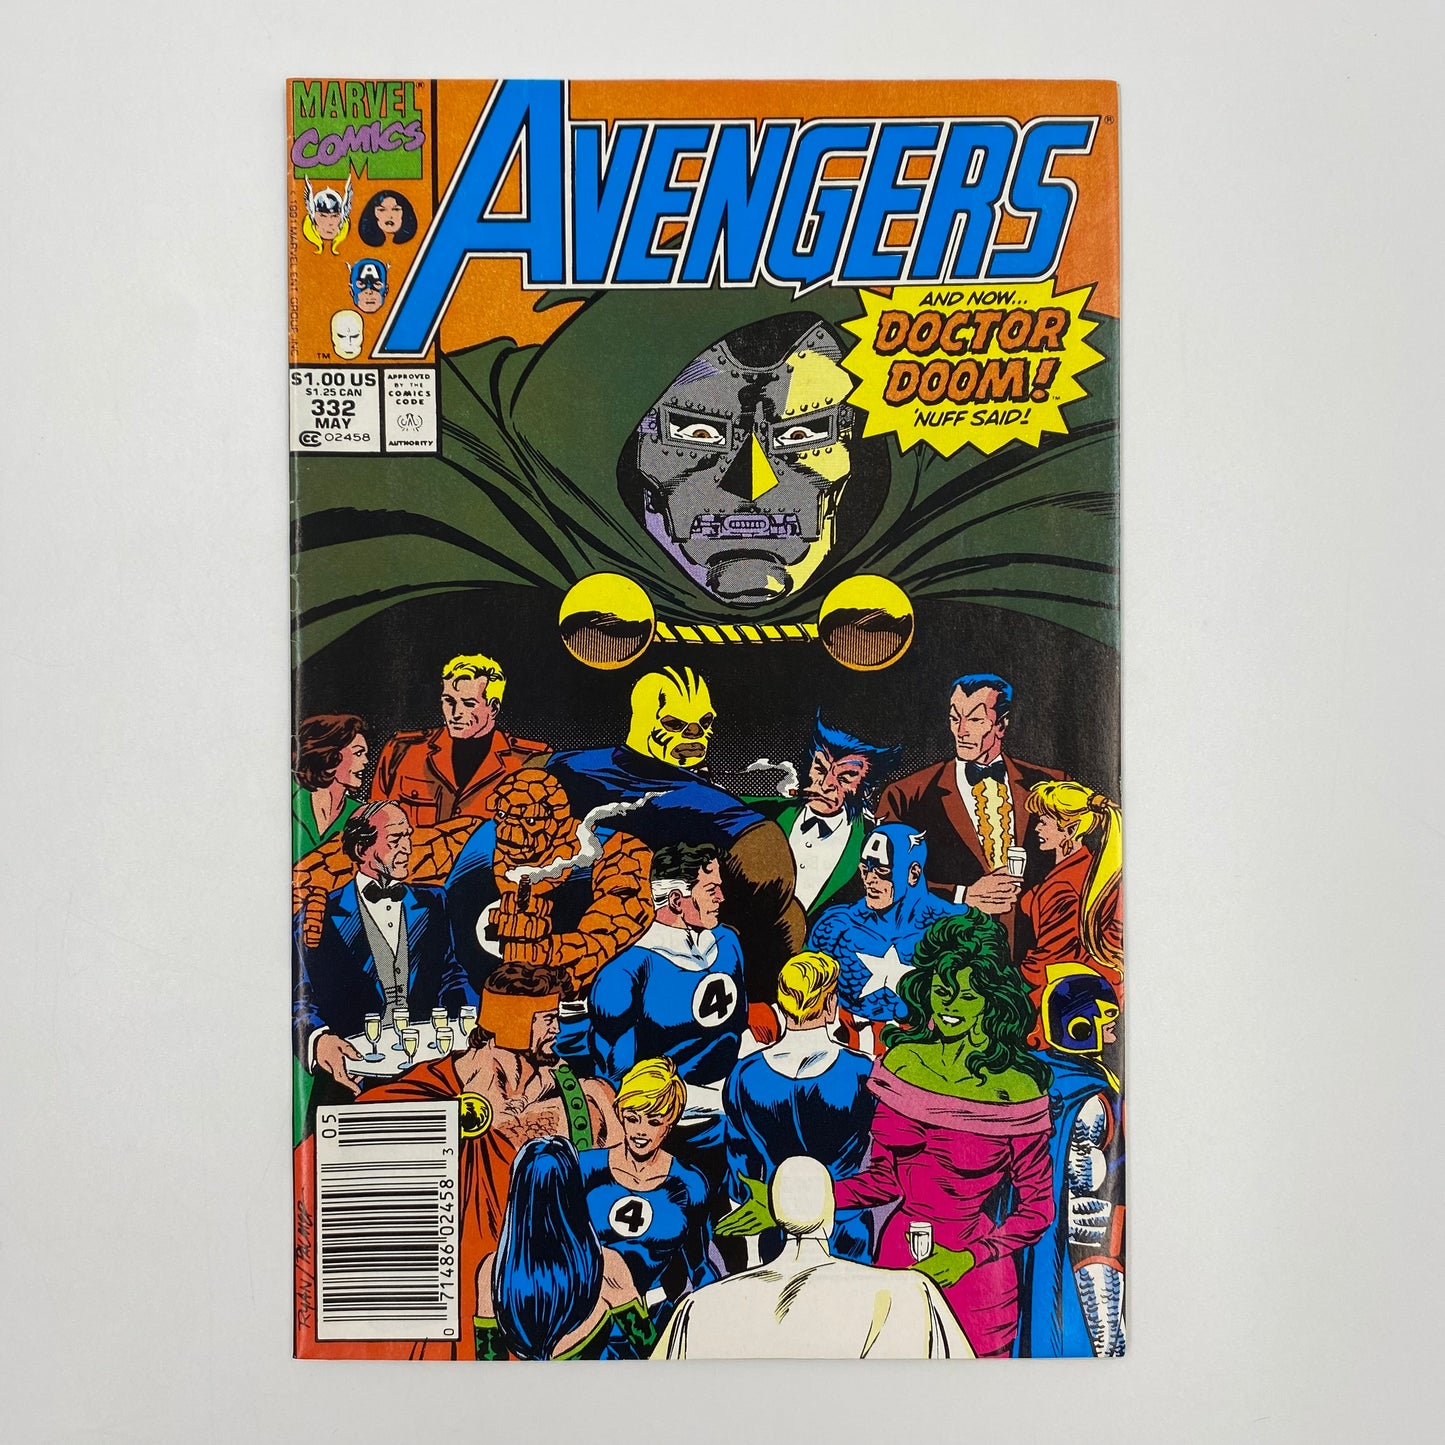 Avengers #332 & #333 "and now...DOCTOR DOOM! 'nuff said!" (1991) Marvel